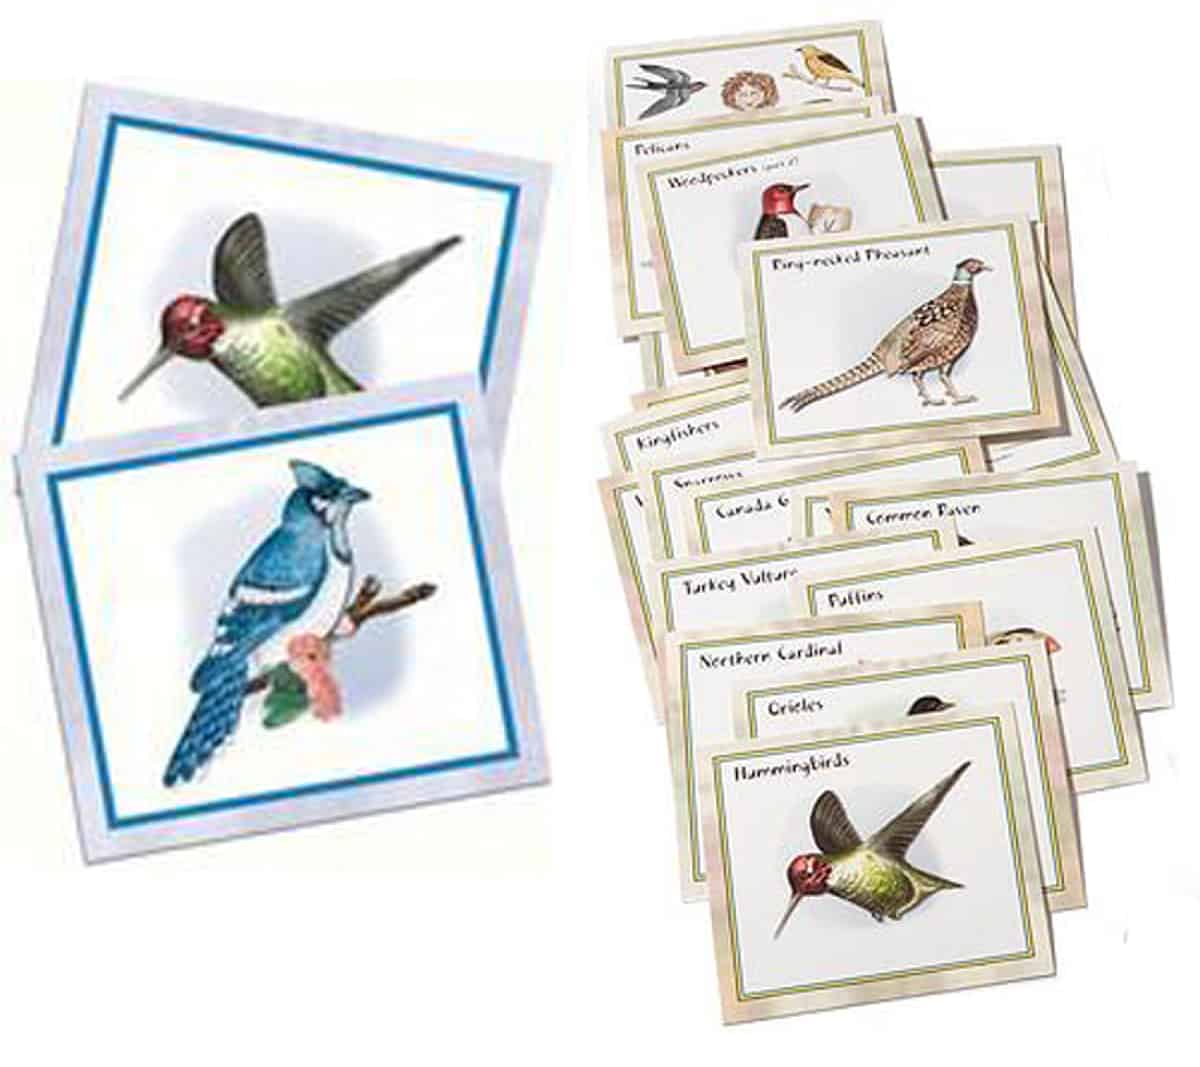 Birds of North America (Outset Media - Professor Noggin’s)  is a quiz card game that focuses on the different avian species in this continent. 